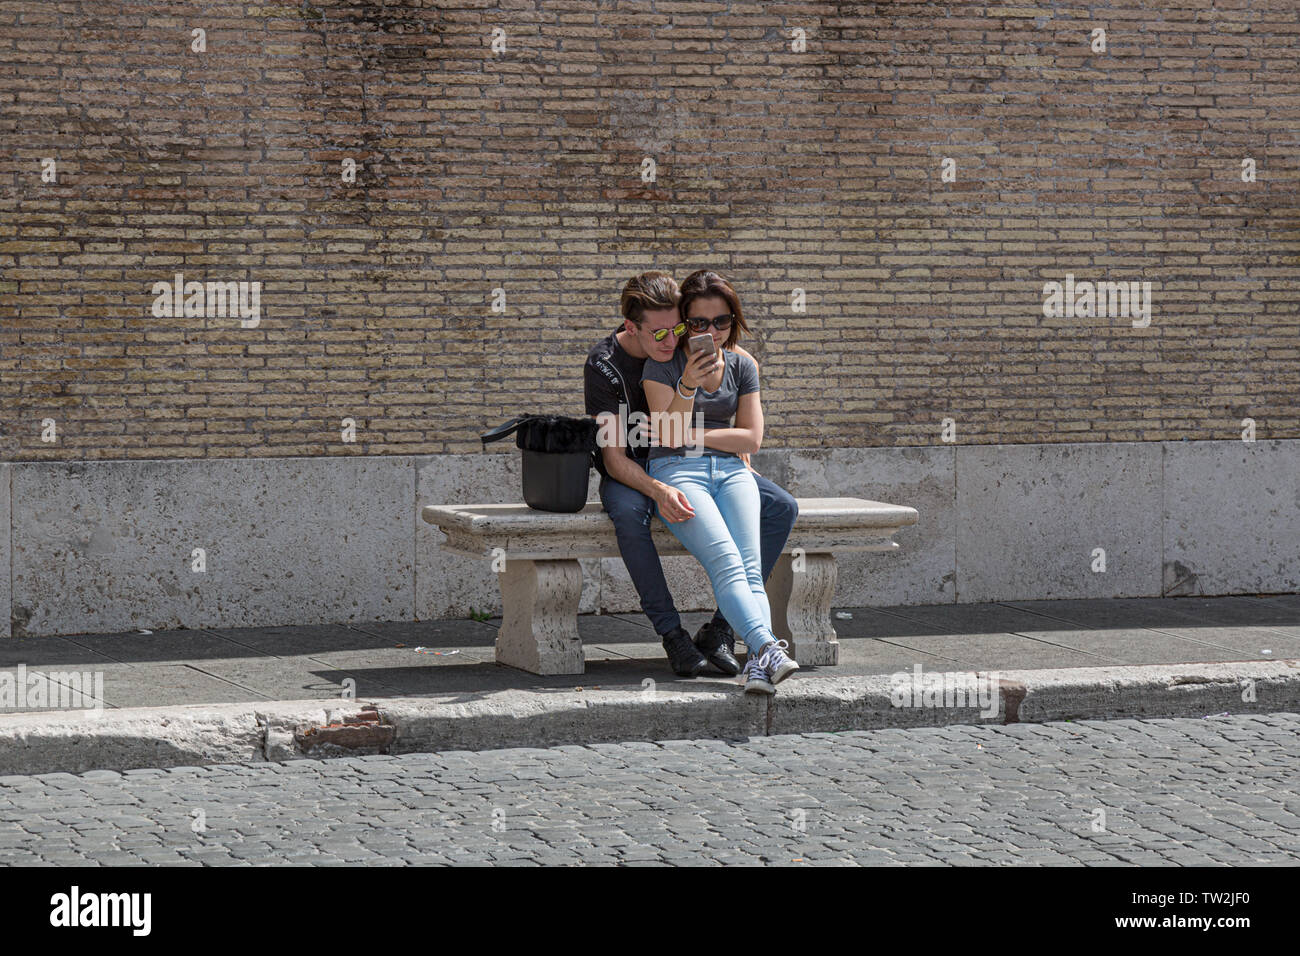 A young couple enjoying themselves in Rome Stock Photo